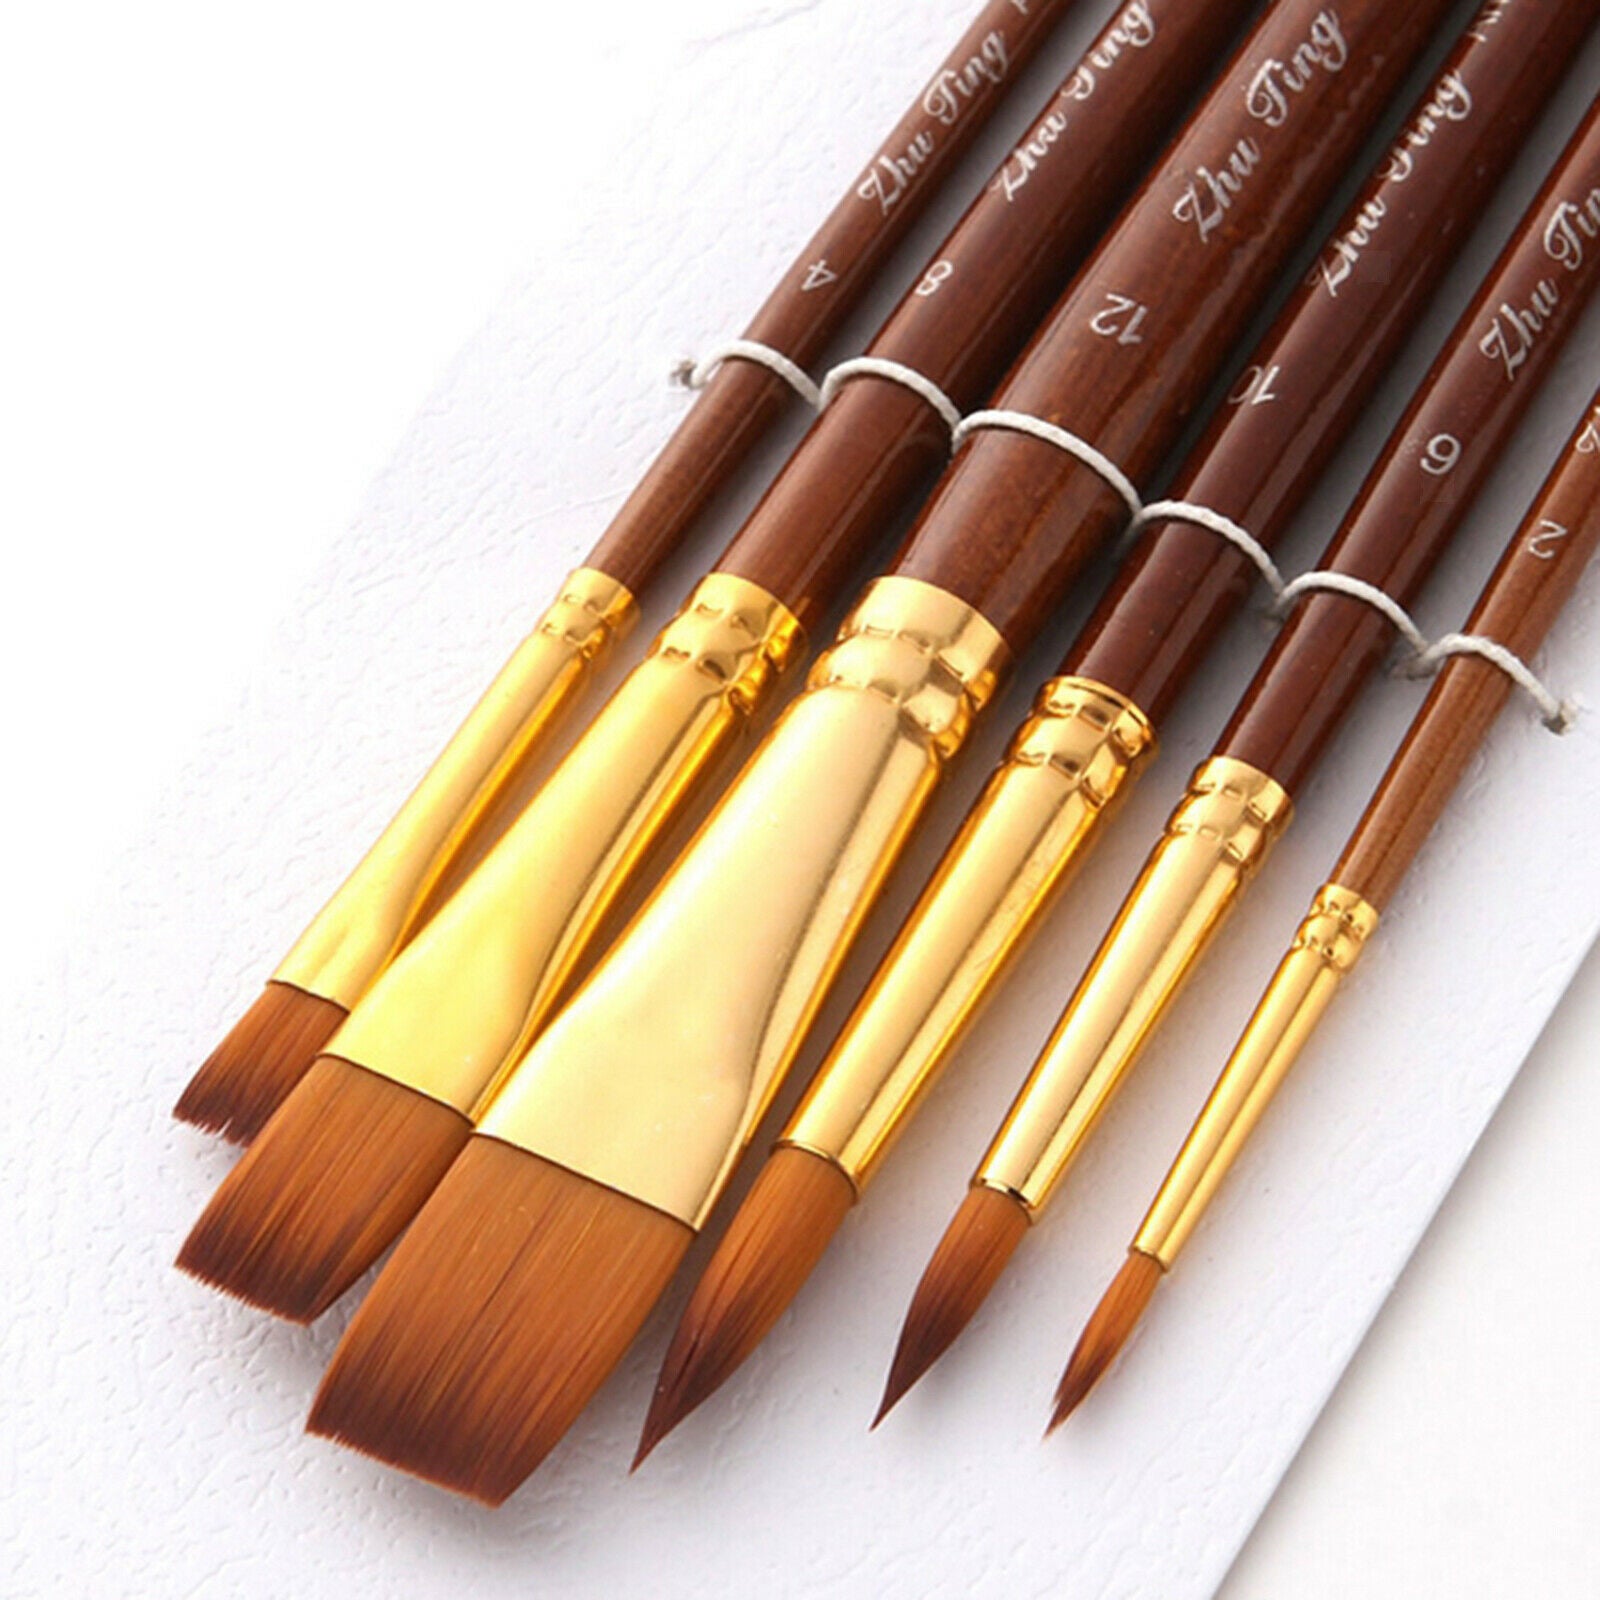 6x Artist Paint Brushes Set DIY Acrylic Oil Watercolor Painting Brushes Tool